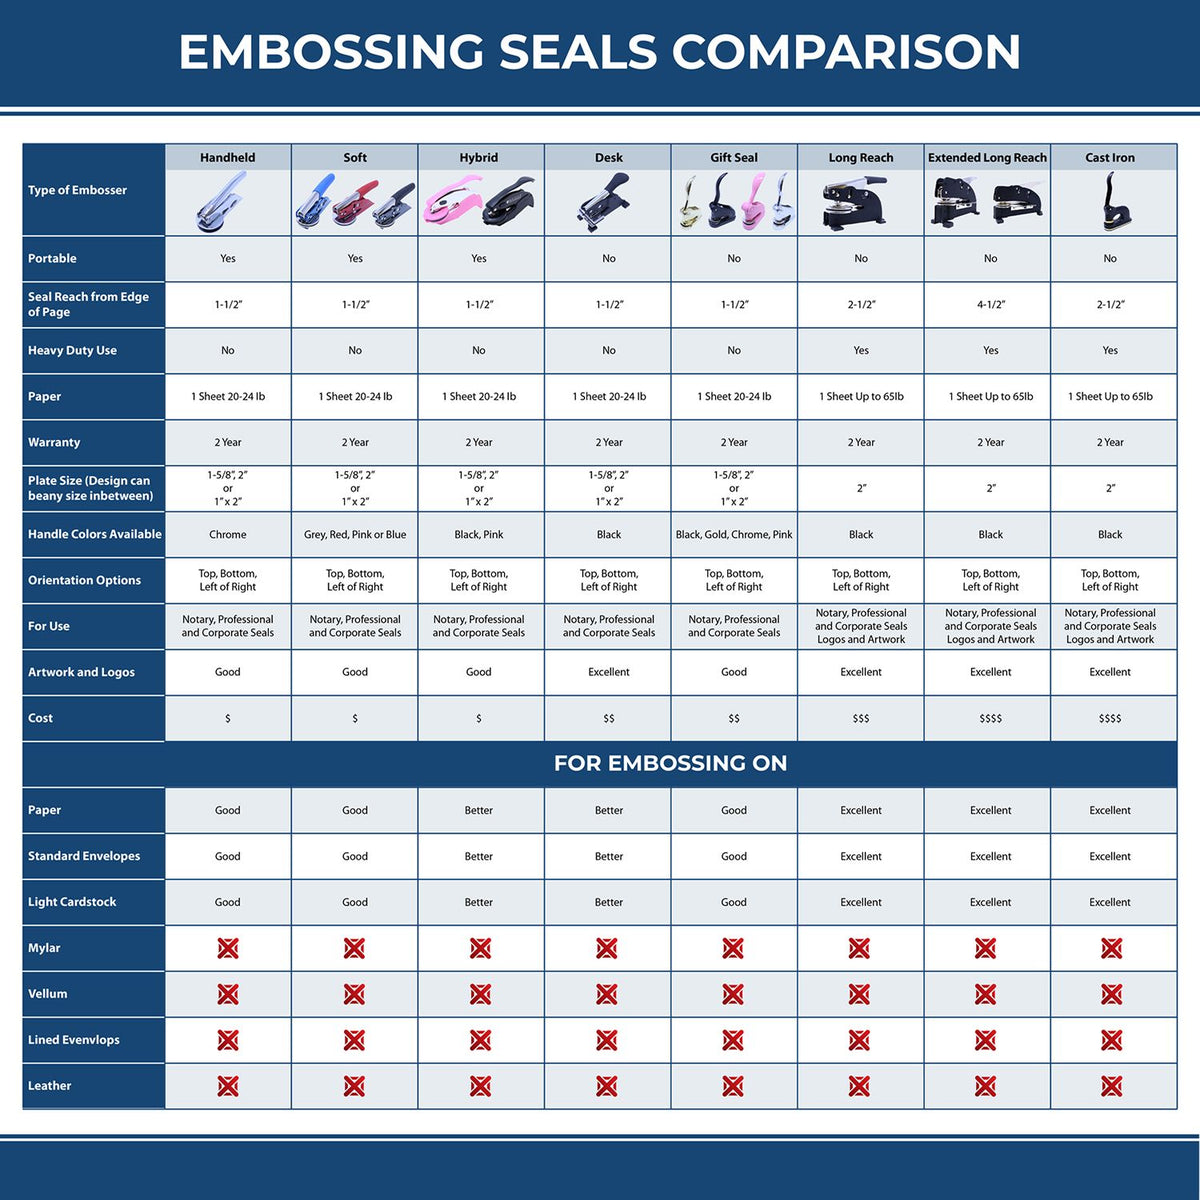 A comparison chart for the different types of mount models available for the Soft Texas Professional Geologist Seal